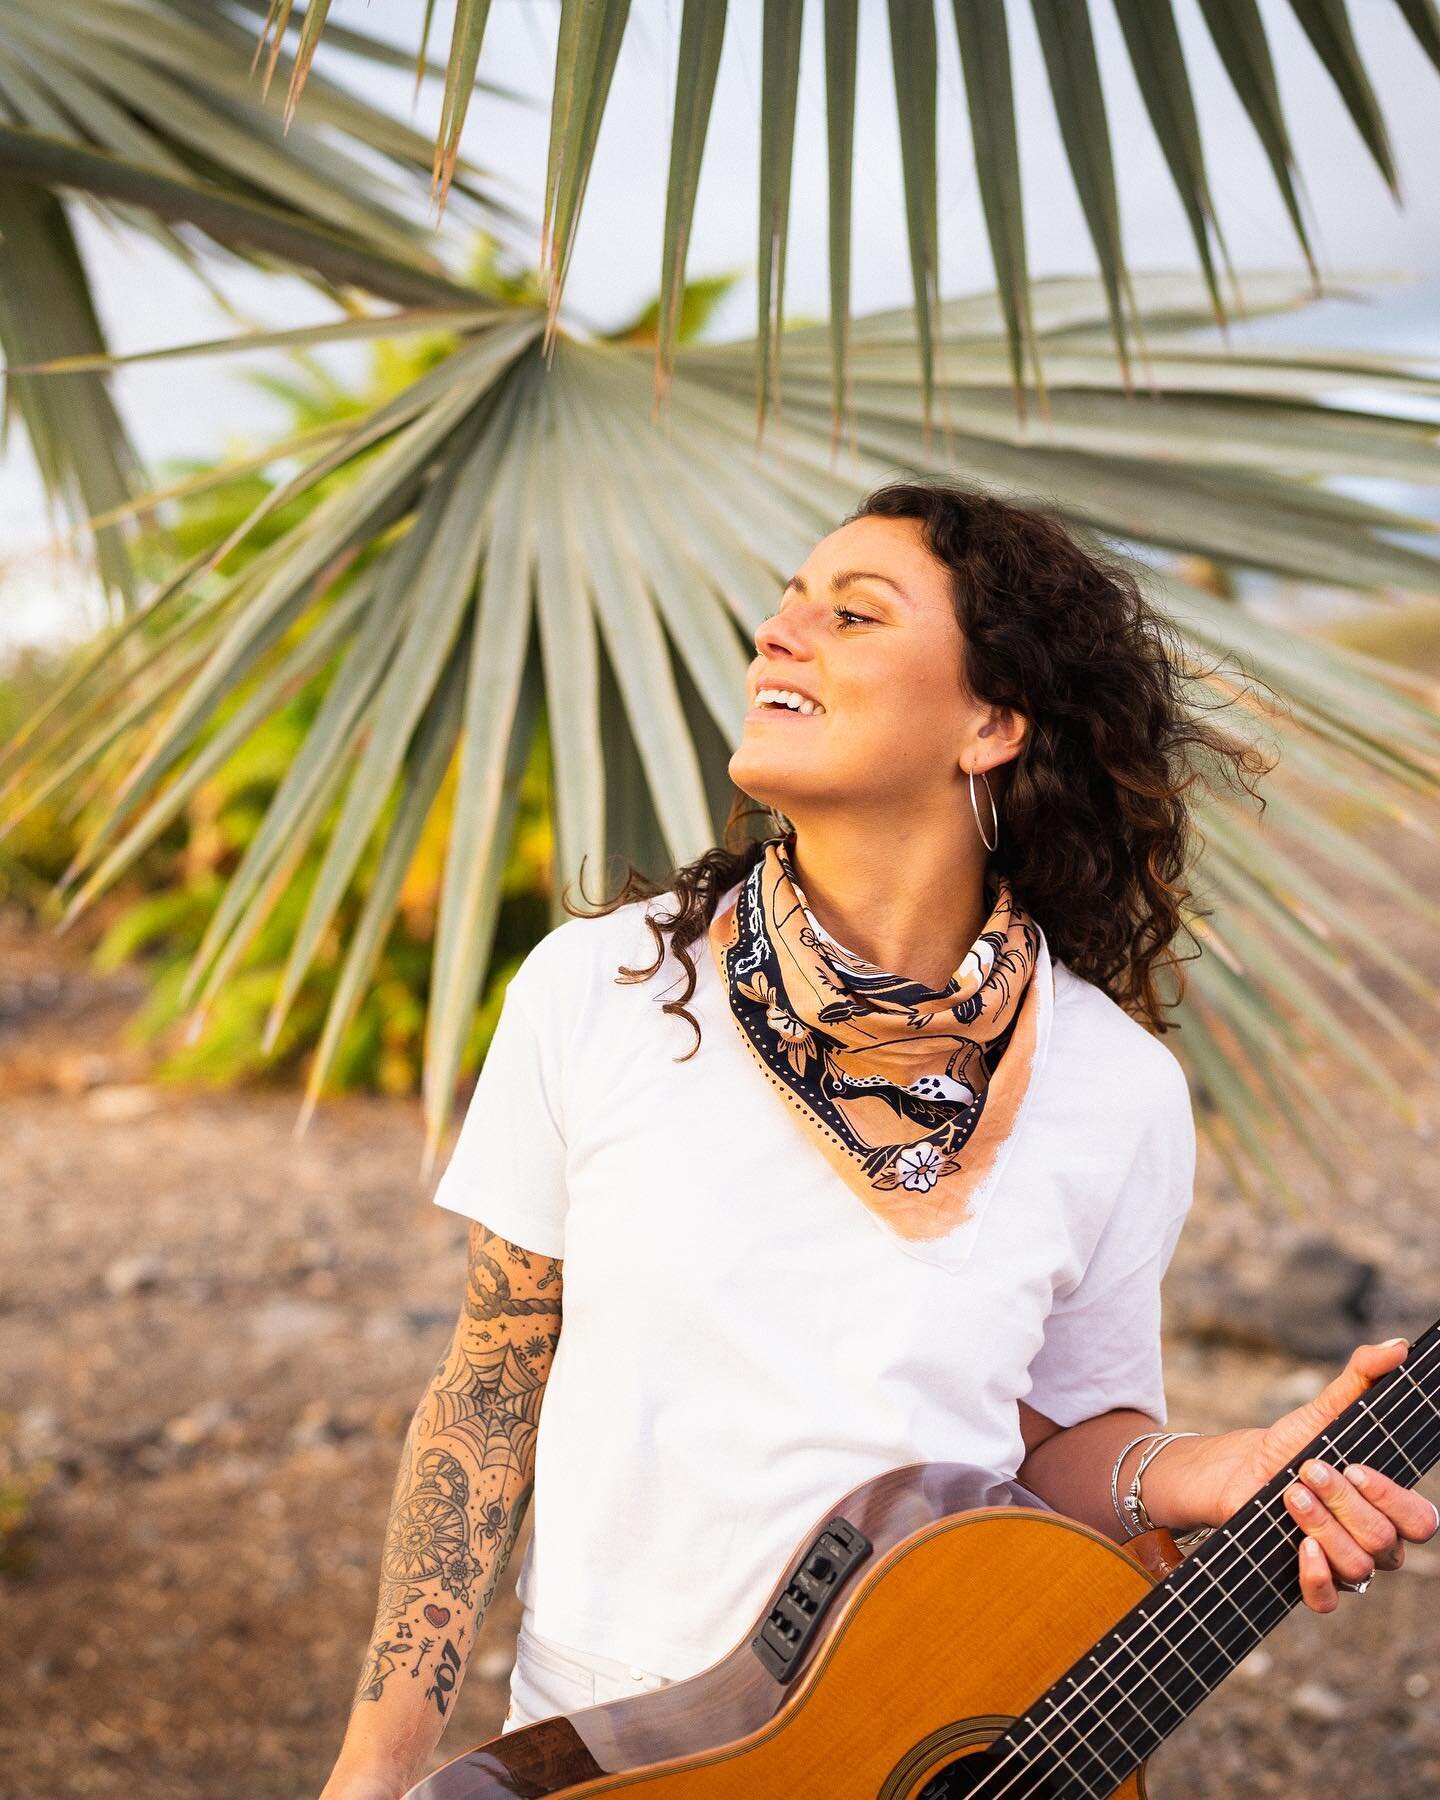 This summer has been a huge reset&hellip; ☀️🌿💦🌈💫🌻 settling back in Hawaii and ready to jam this @cordobaguitars 

UPCOMING 🎶:
8/26 @papakonarestaurant  6pm
8/31 @papakonarestaurant  6pm
9/15 @willieshotchicken_whc  6pm

See you soon!! 😍 📸: @j